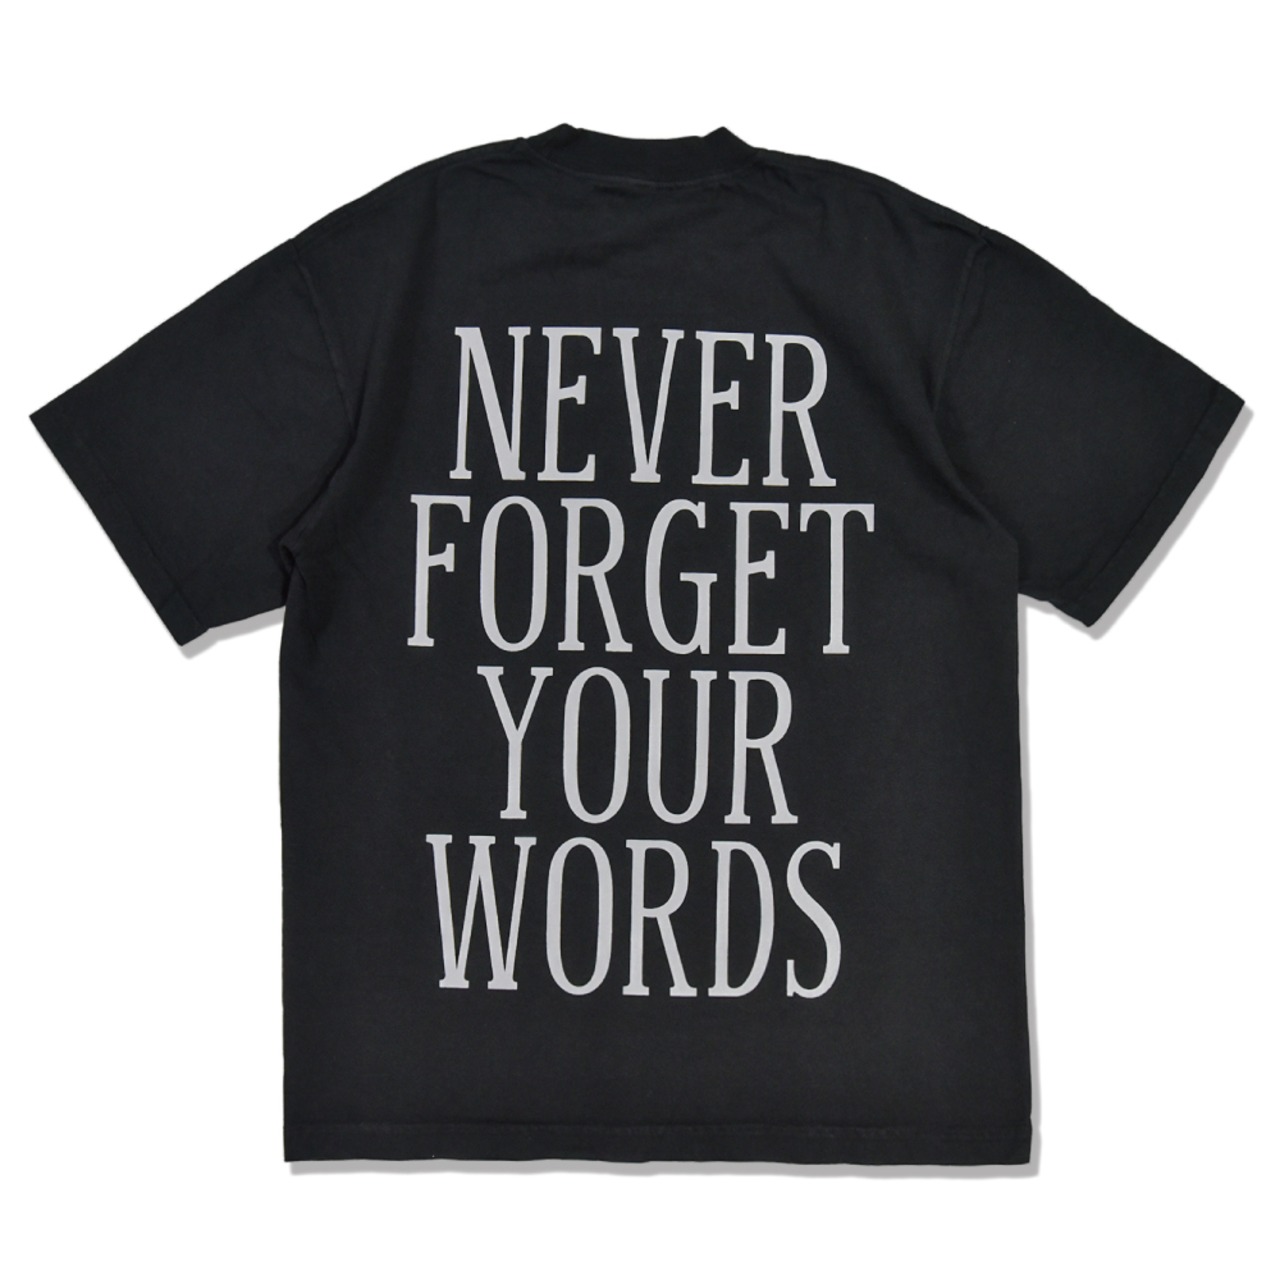 Never Forget Tee Shirts - Black